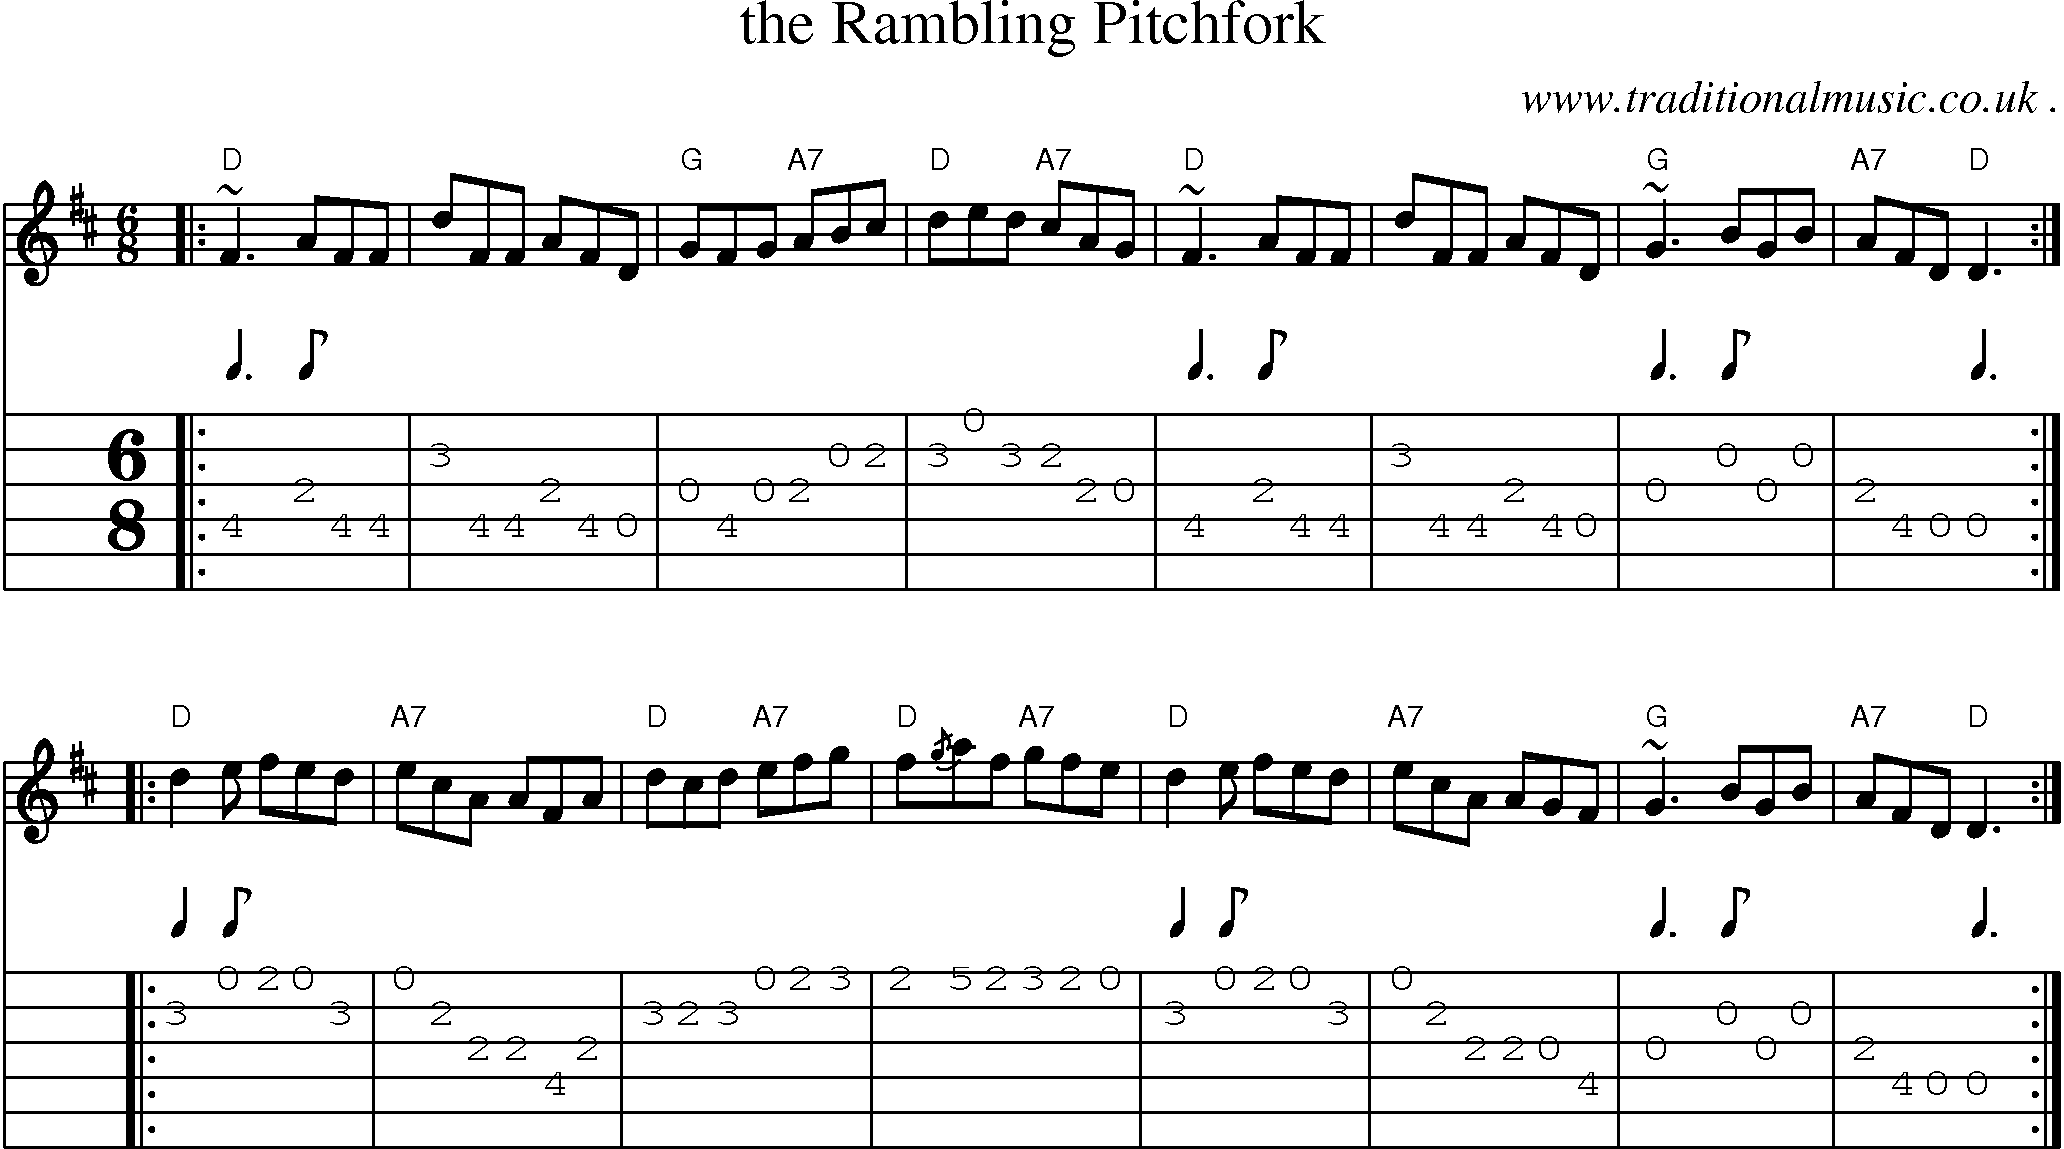 Sheet-music  score, Chords and Guitar Tabs for The Rambling Pitchfork